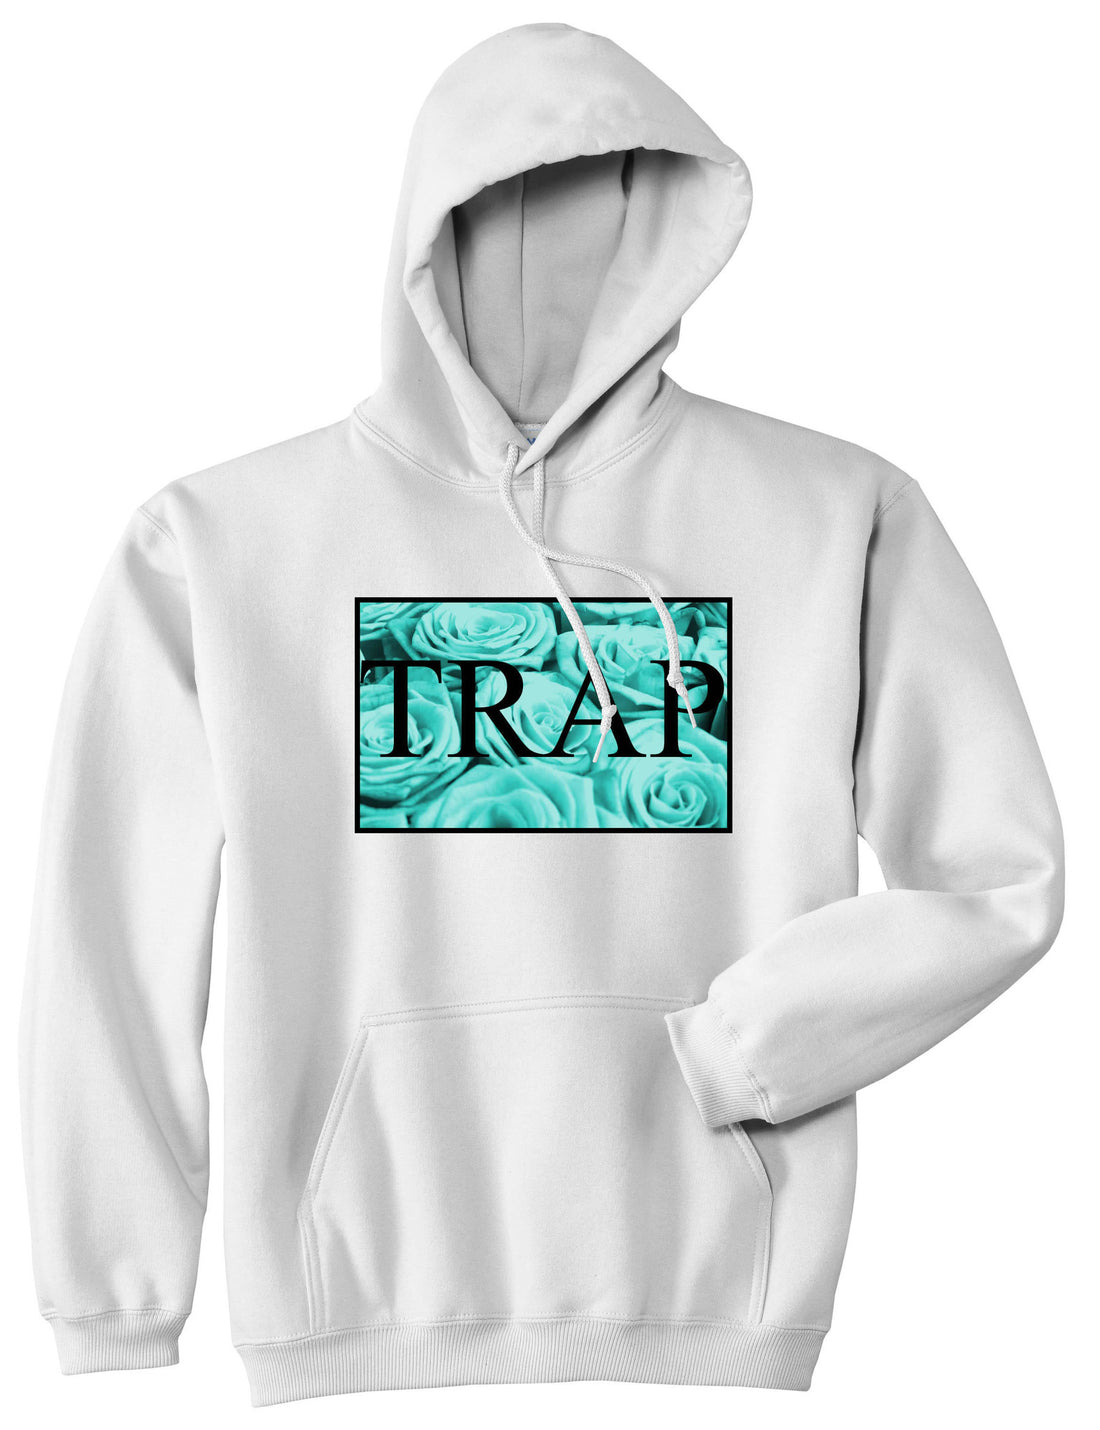 Trap Floral Style Hood Music Hood Dope Boys Kids Pullover Hoodie Hoody in White by Kings Of NY